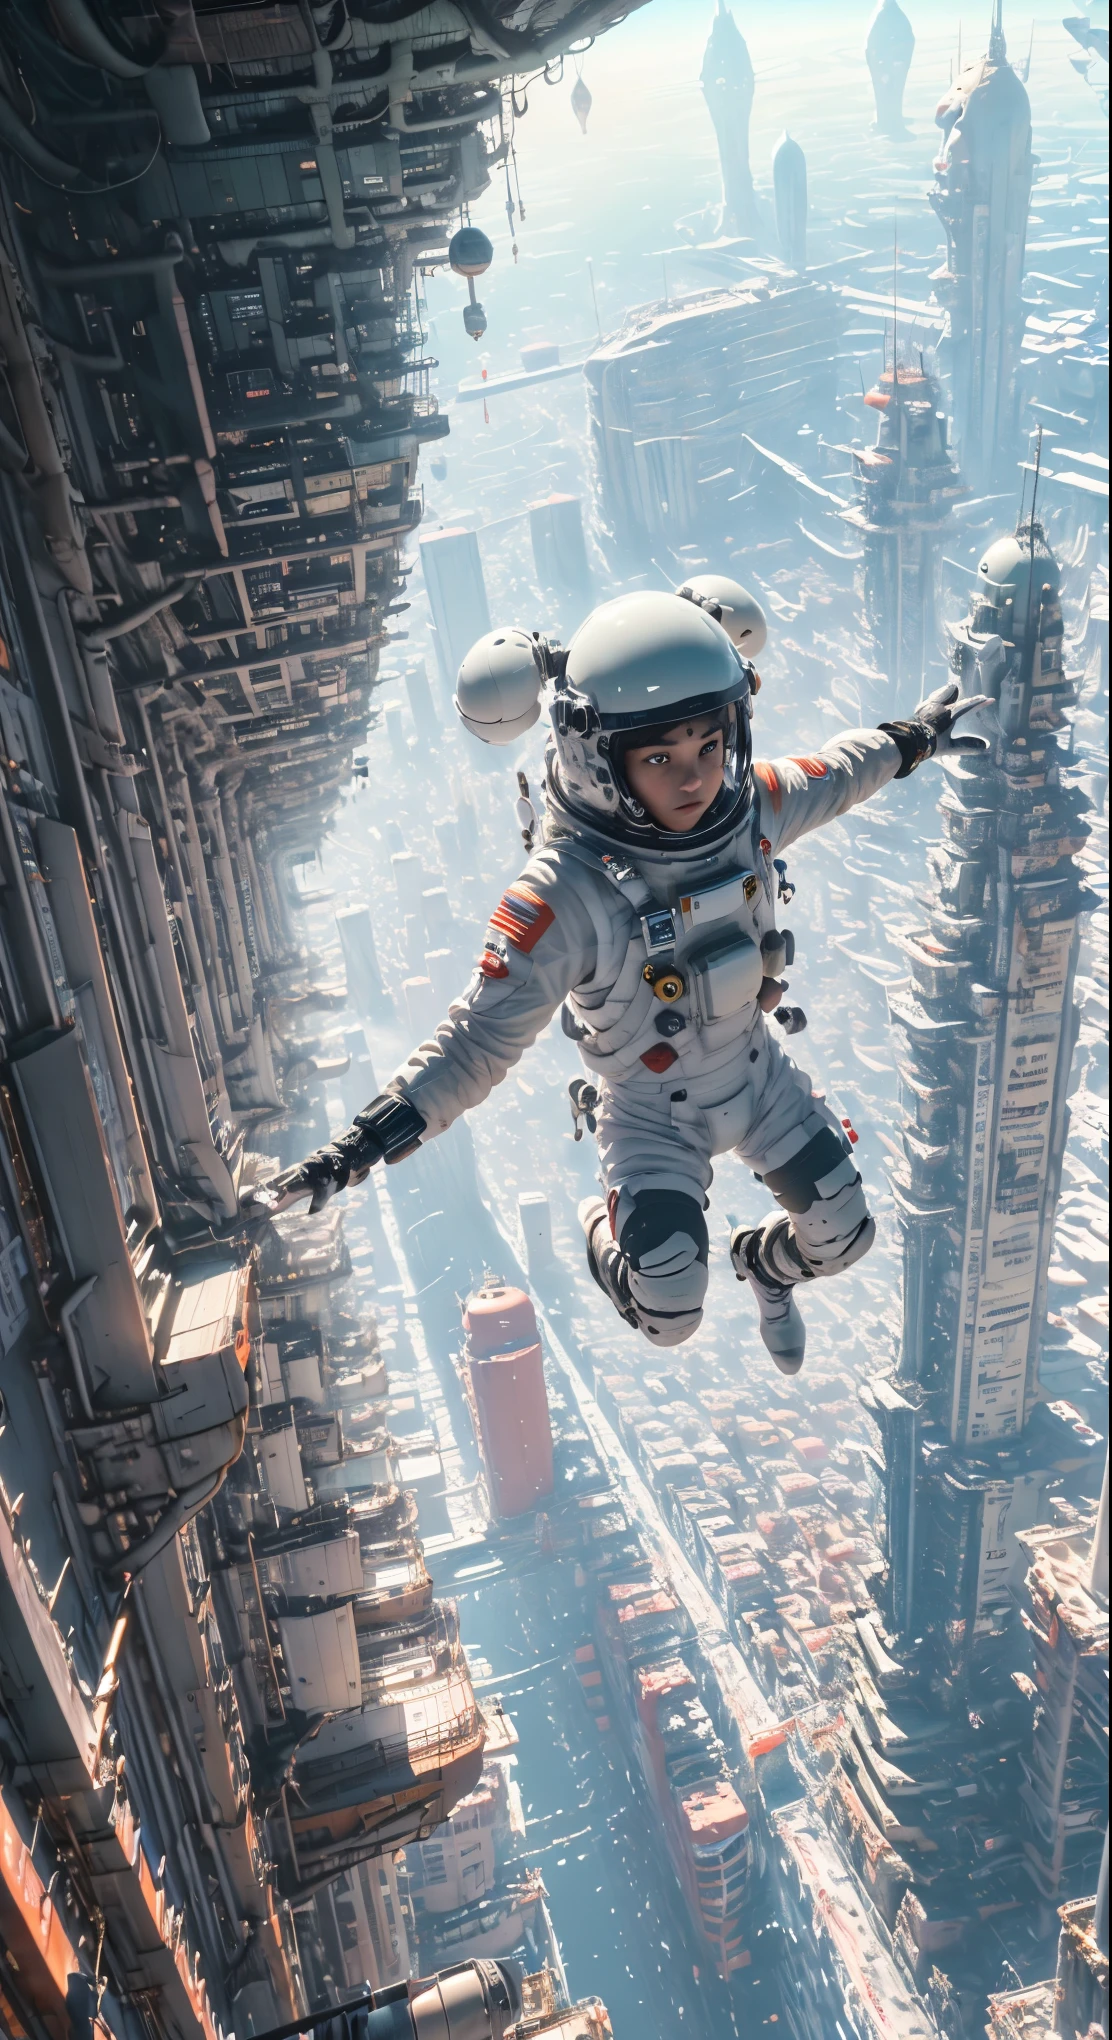 (best quality, 4k, ultra detailed, high resolution, masterpiece: 1.2),Personaje a la Distancia: Hay un personaje visto desde lejos, located at a high observation point. It is small compared to the surroundings, resaltando la magnitud de la nave. The character is equipped with a space suit, with flashing lights and mechanical details.
Vista del Espacio Exterior: Through the openings in the ship, se ve un vasto espacio estrellado. The stars are unevenly distributed, creating variable densities and suggesting the remoteness of some celestial objects.